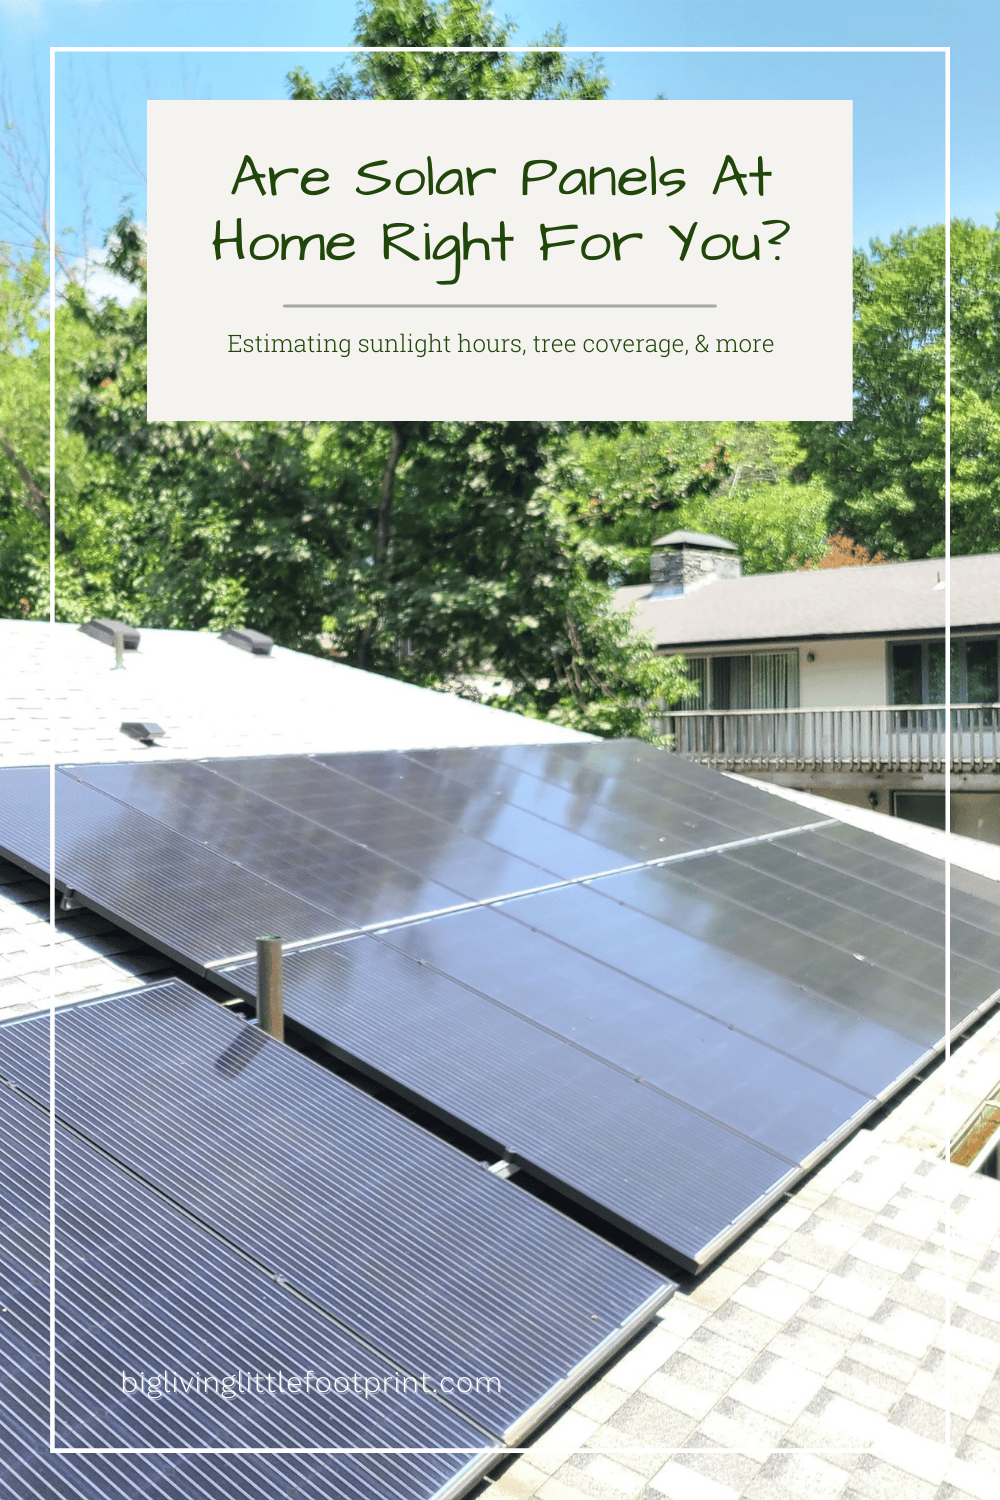 Are Solar Panels At Home Right for You?